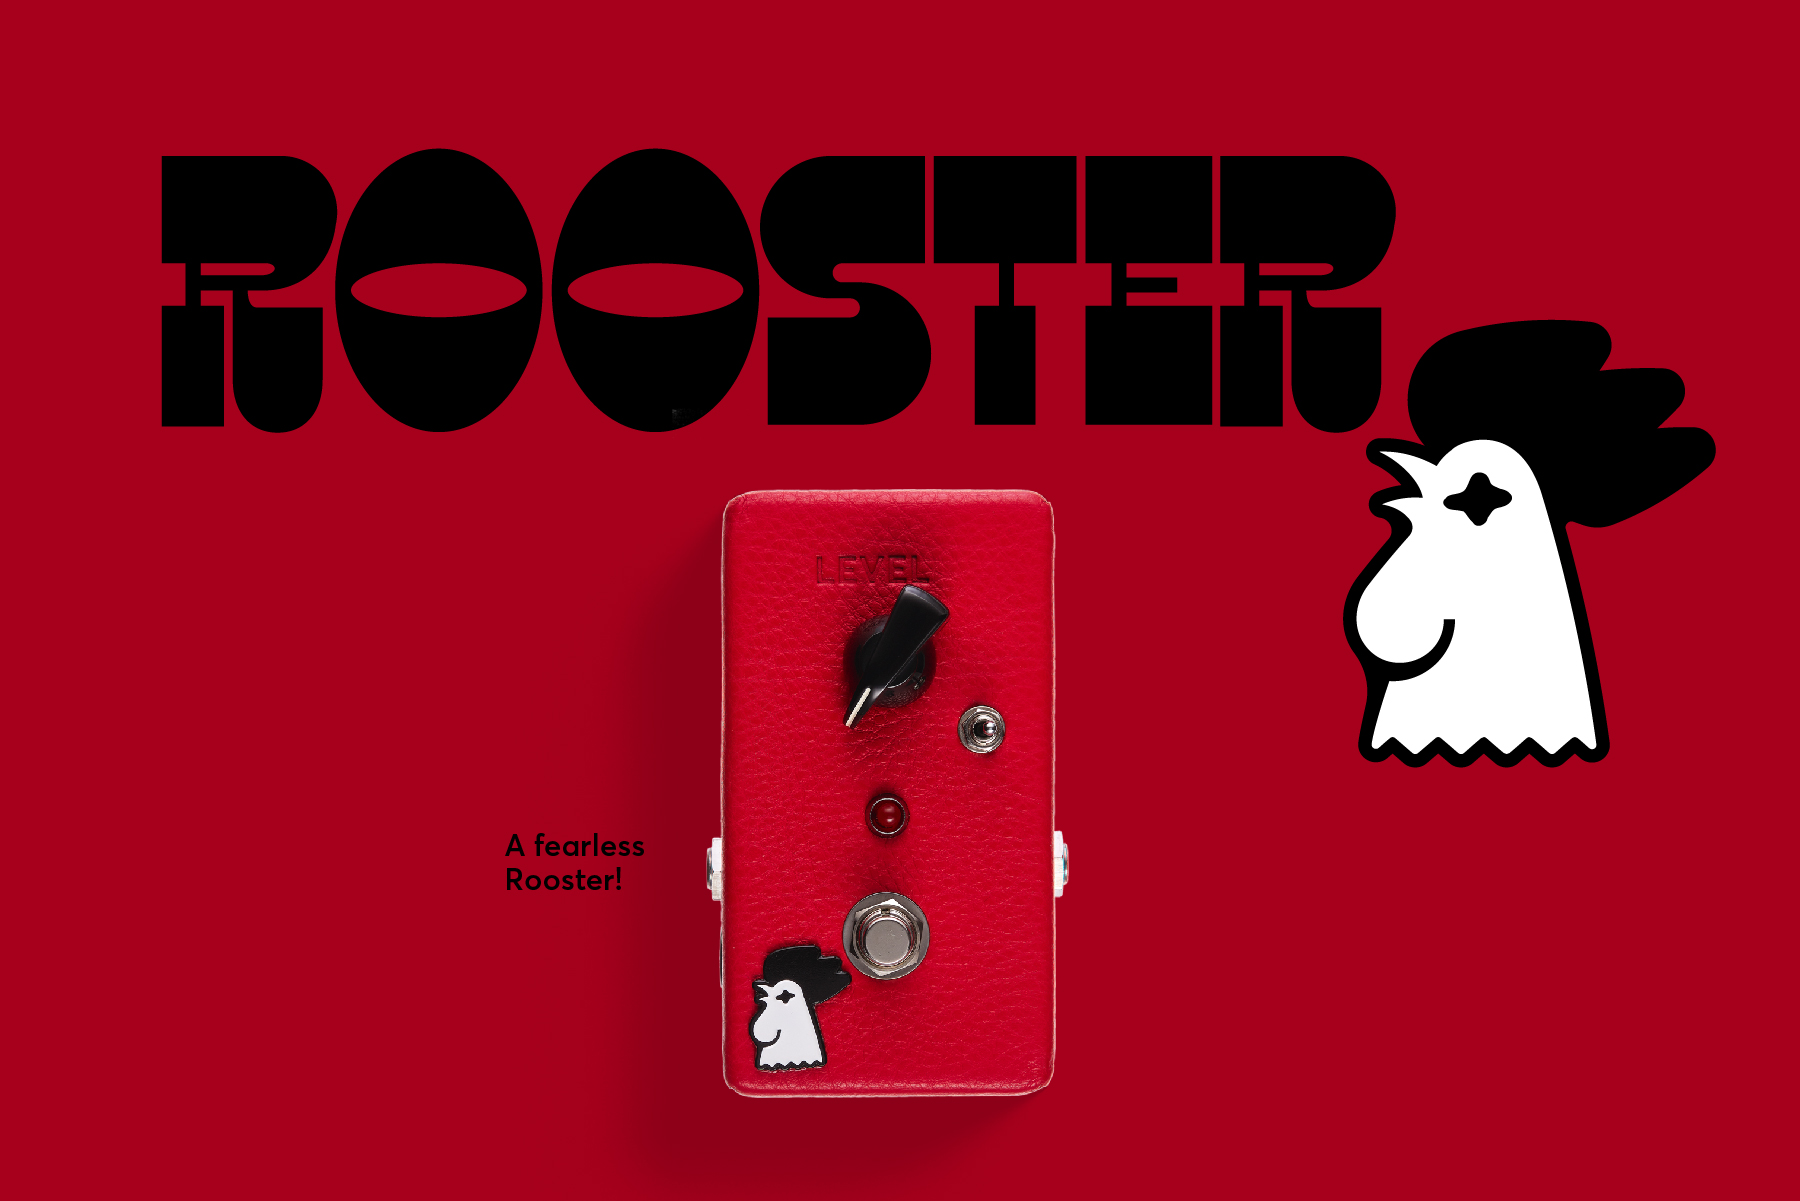 Rooster ltd – SOLD OUT